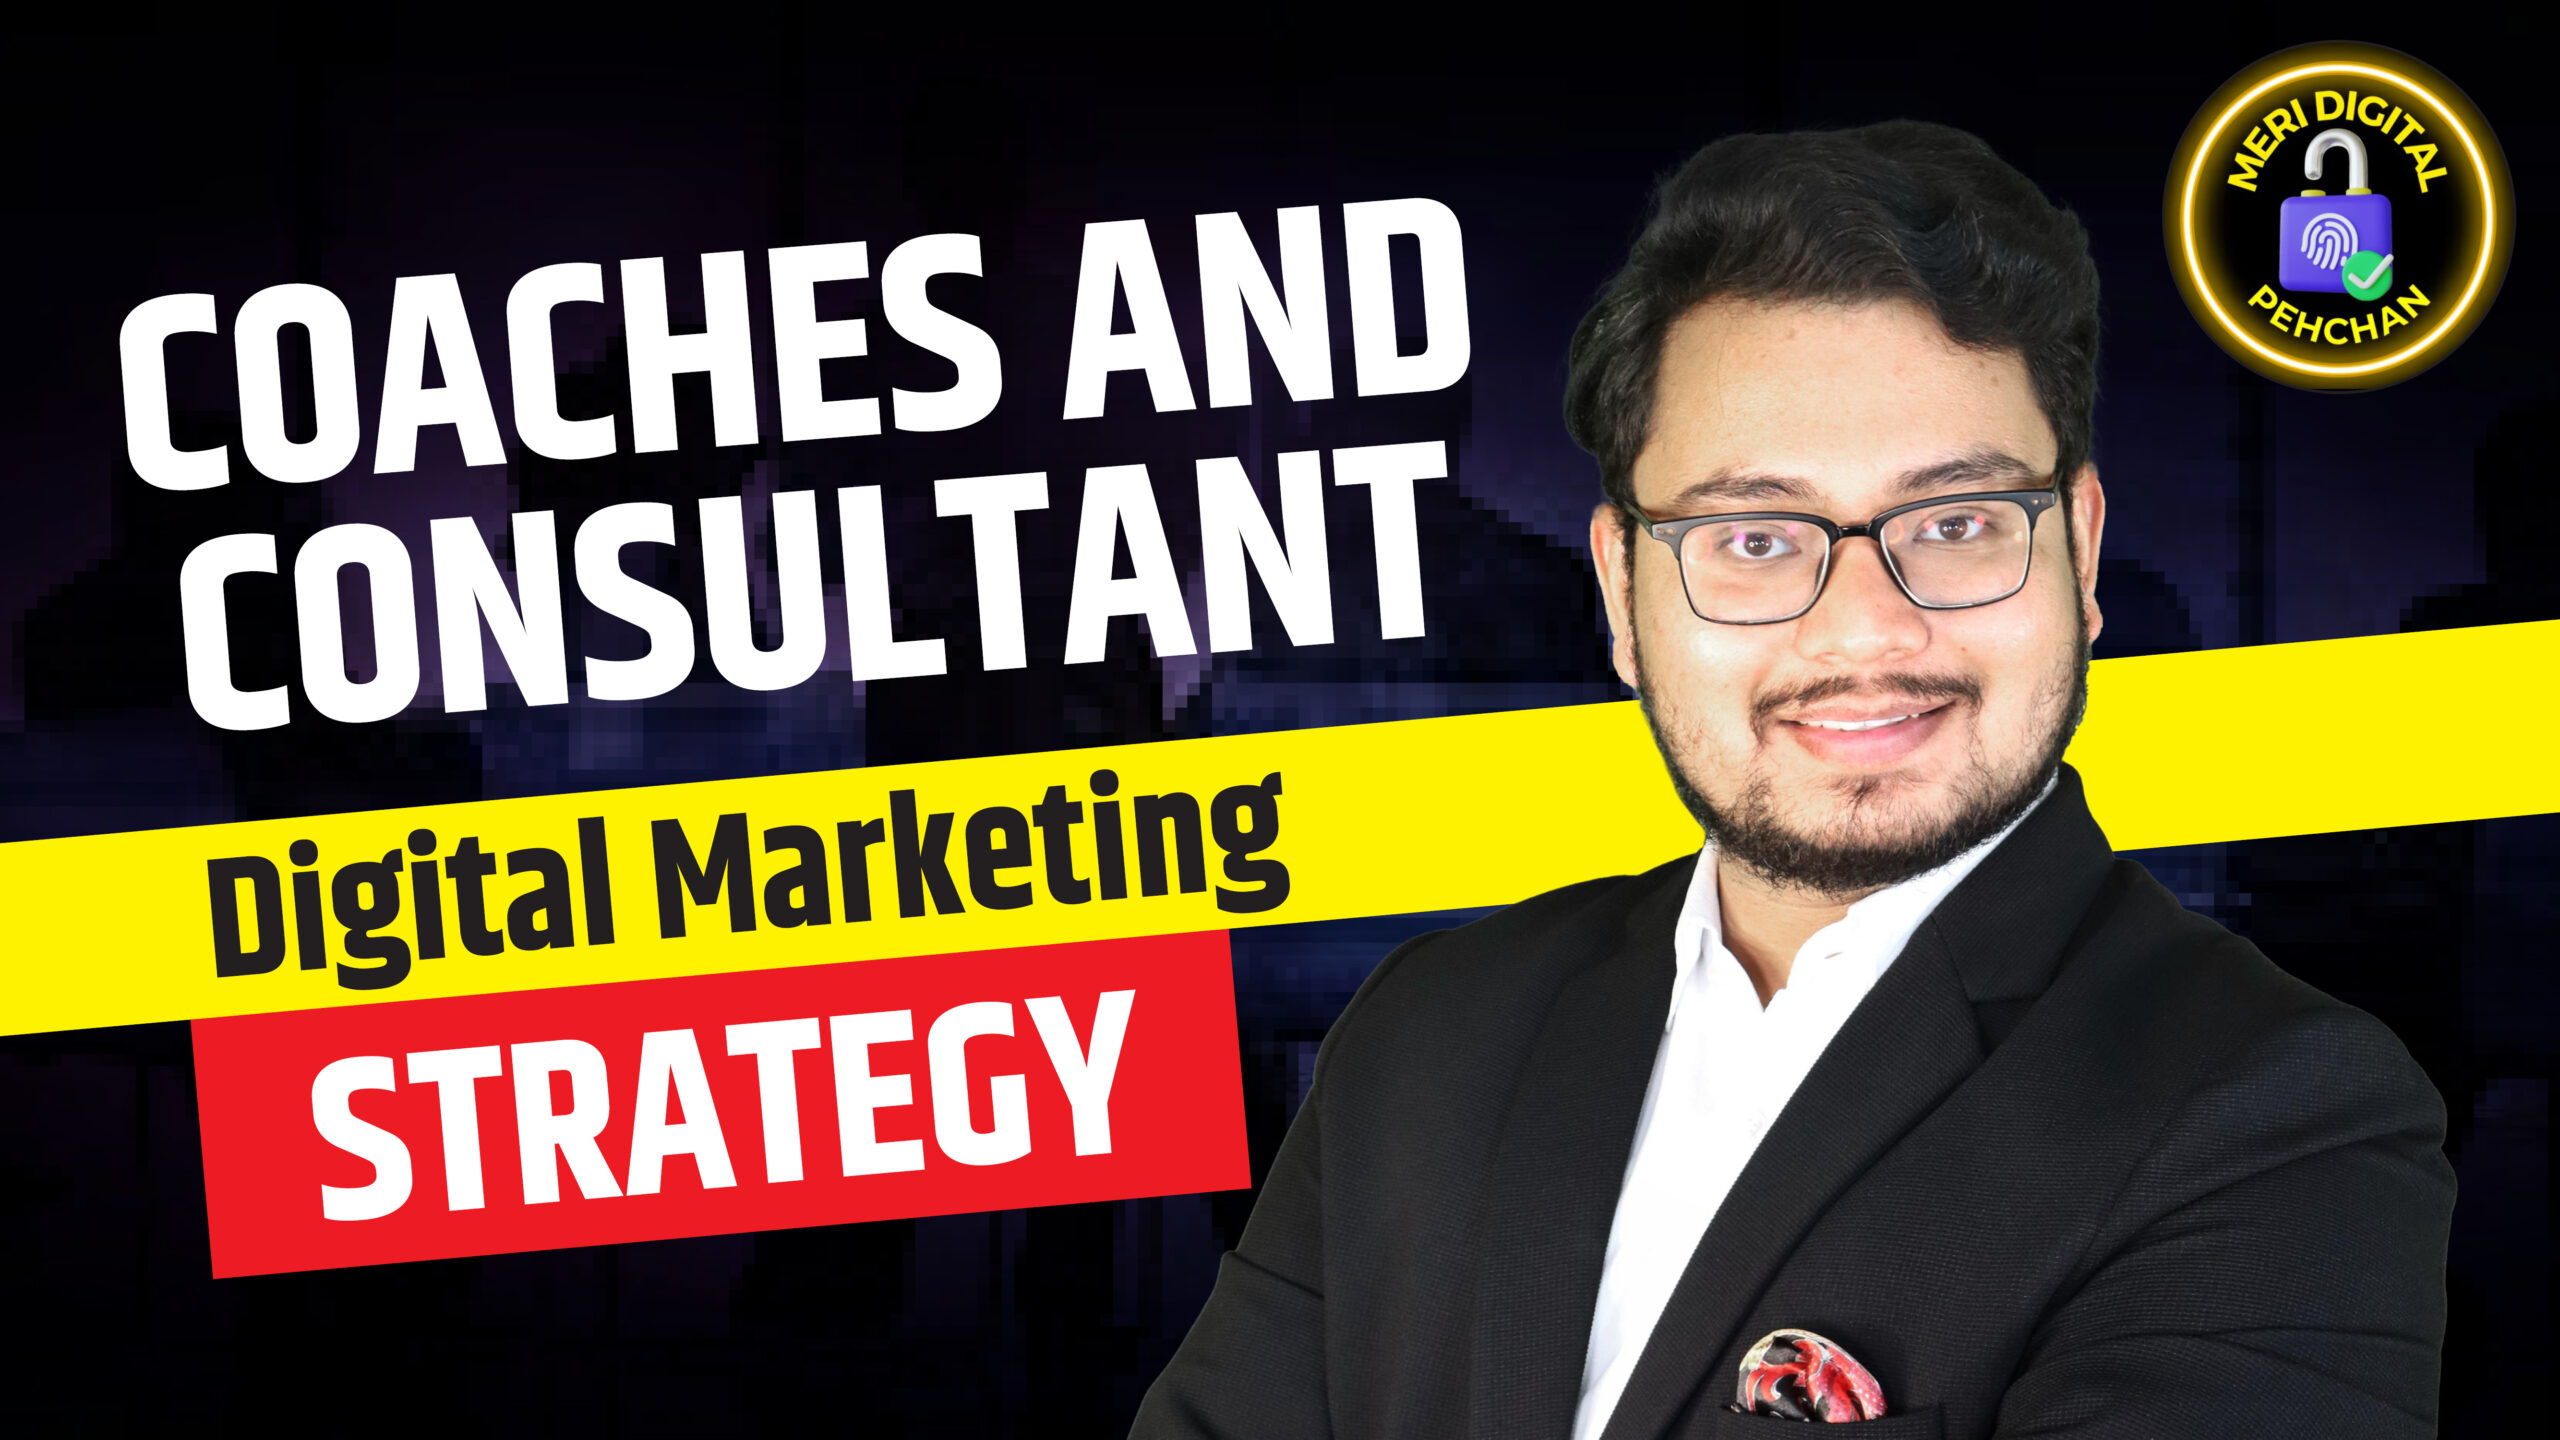 Digital Marketing Strategy for Coaches and Consultants